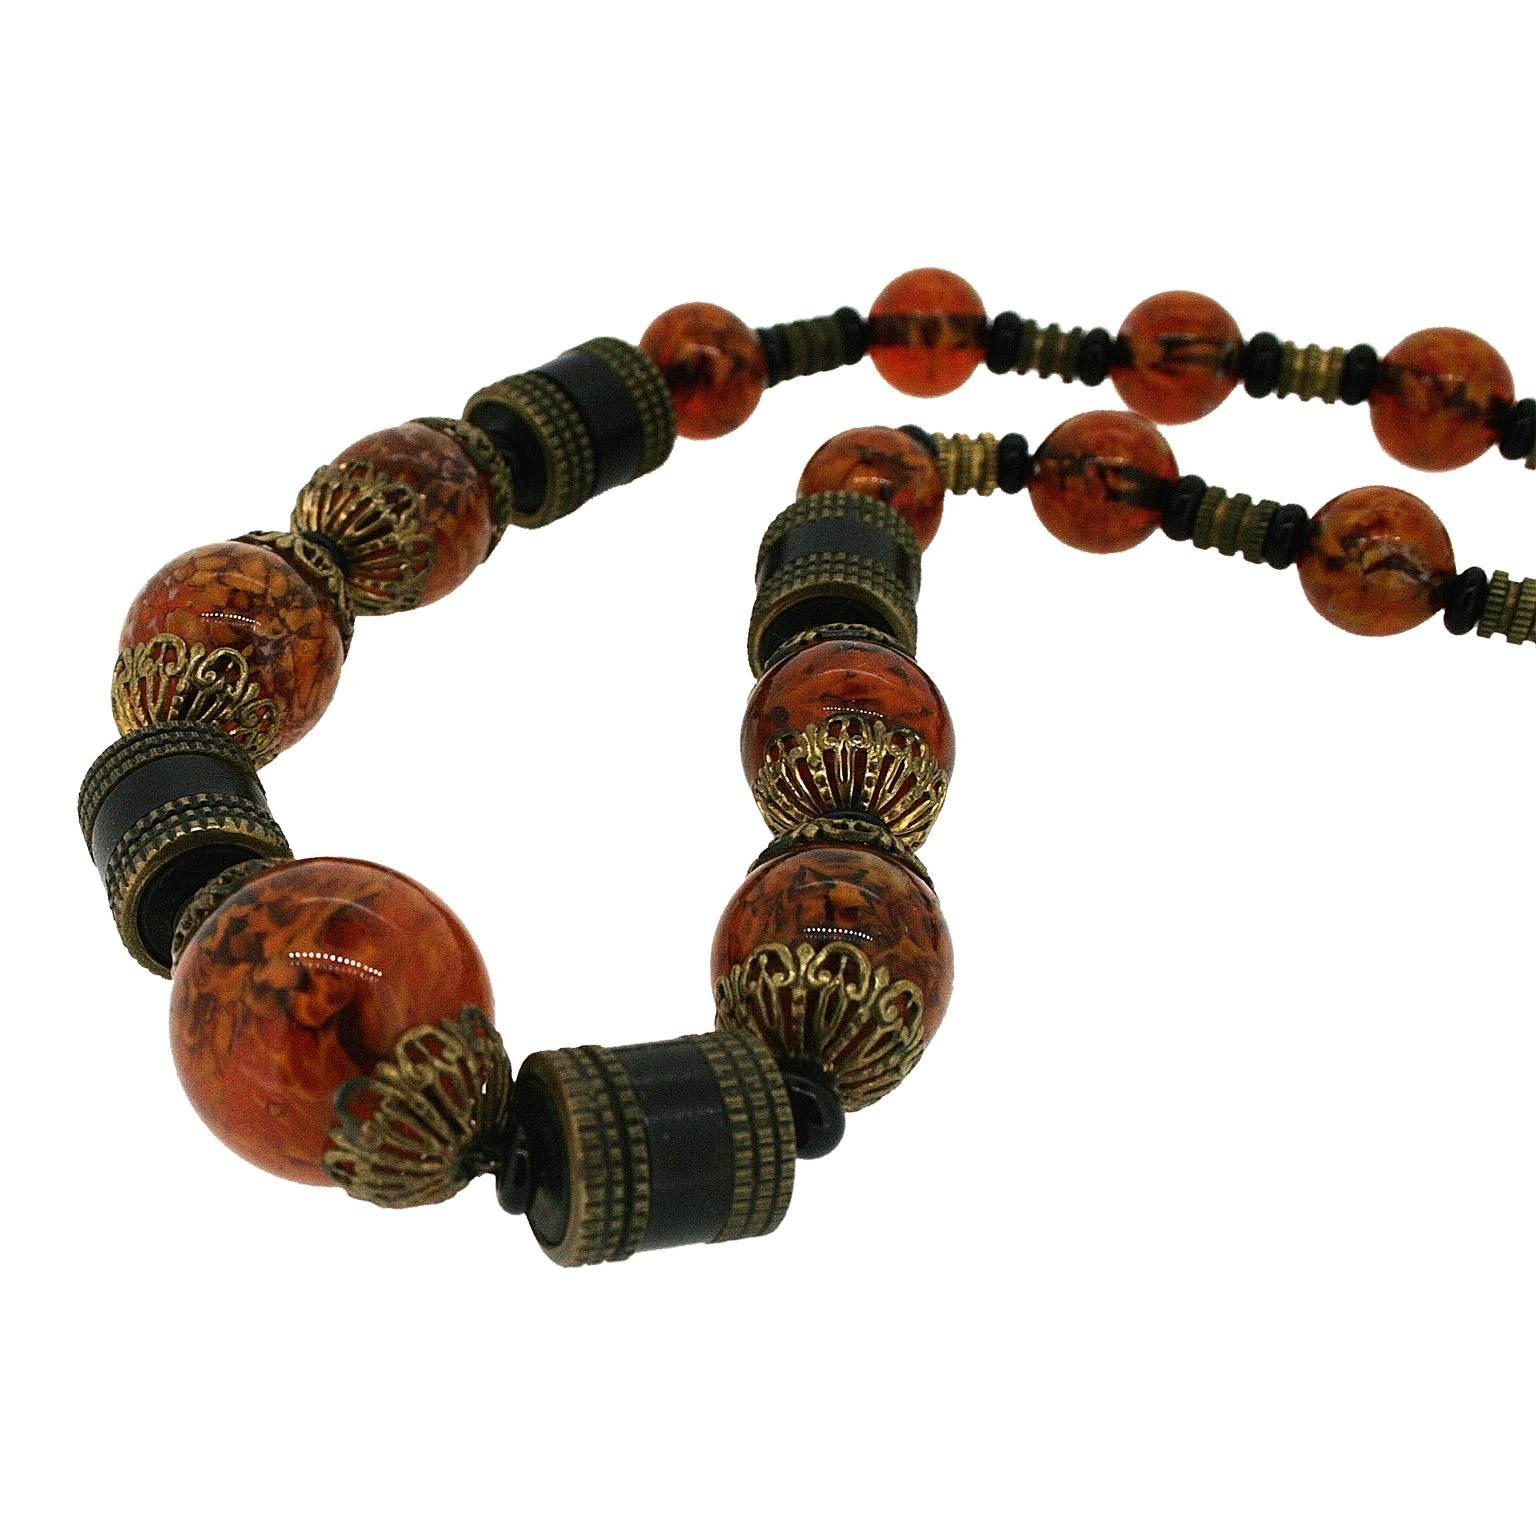 This beautiful necklace in a stylish amber hue dates from the 1930s. It was created in Czechoslovakia.
Condition Report:
Excellent
The Details...
This necklace features round marbelled amber glass beads, black rondelle shaped beads, brown wooden